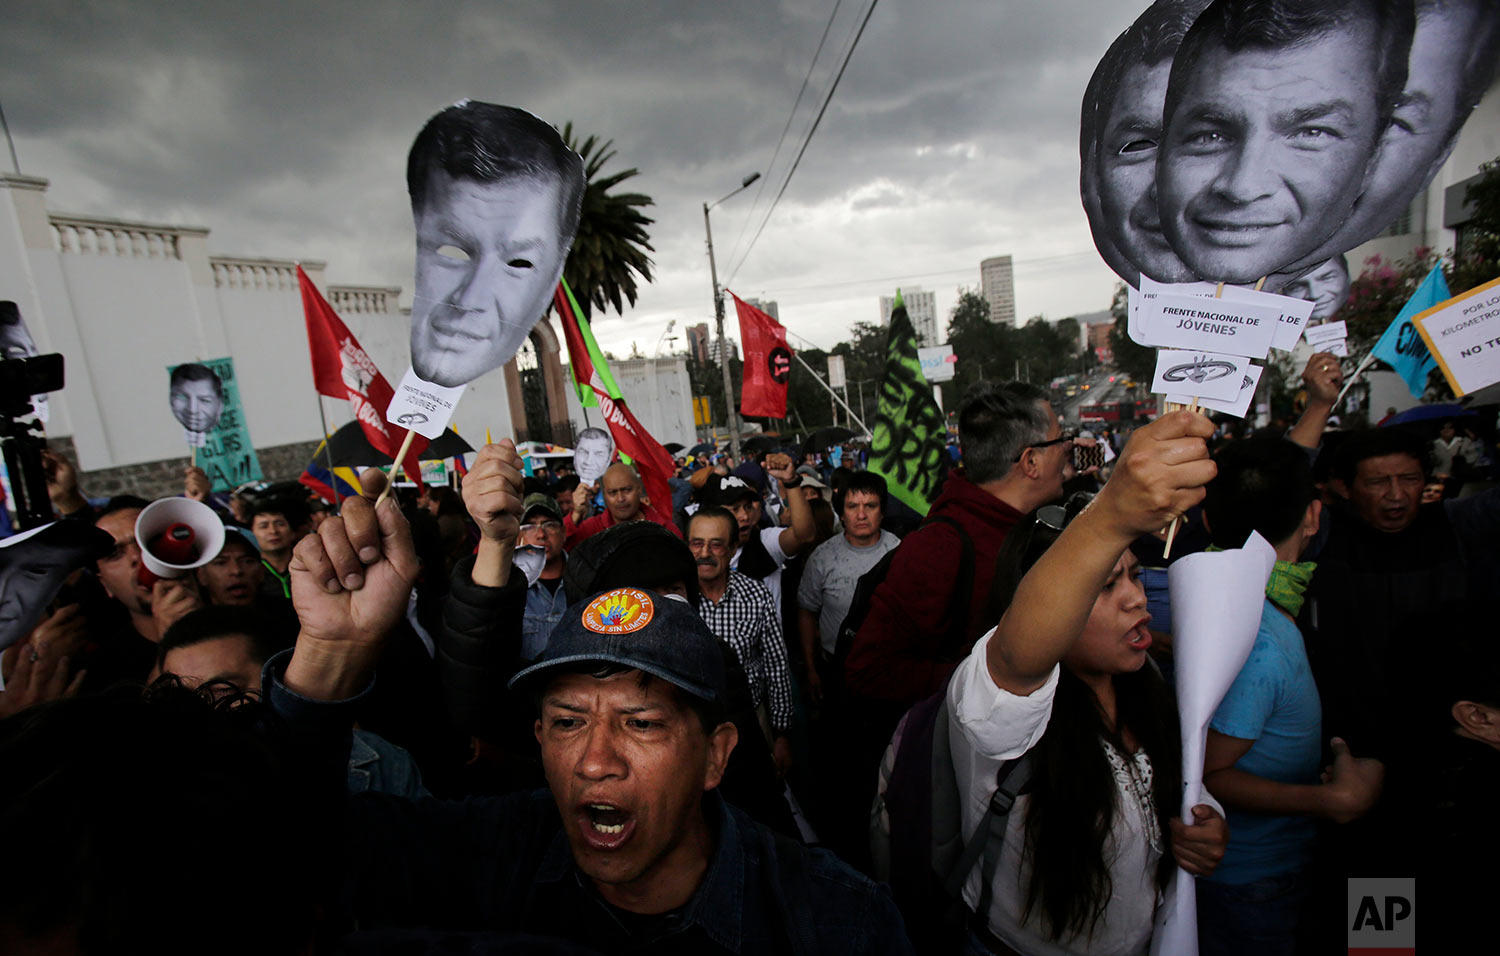  Supporters of Ecuador's former President Rafael Correa hold up his image to protest an attempt to prosecute him in connection with the attempted kidnapping of opposition lawmaker, in Quito, Ecuador, June 14, 2018. (AP Photo/Dolores Ochoa) 